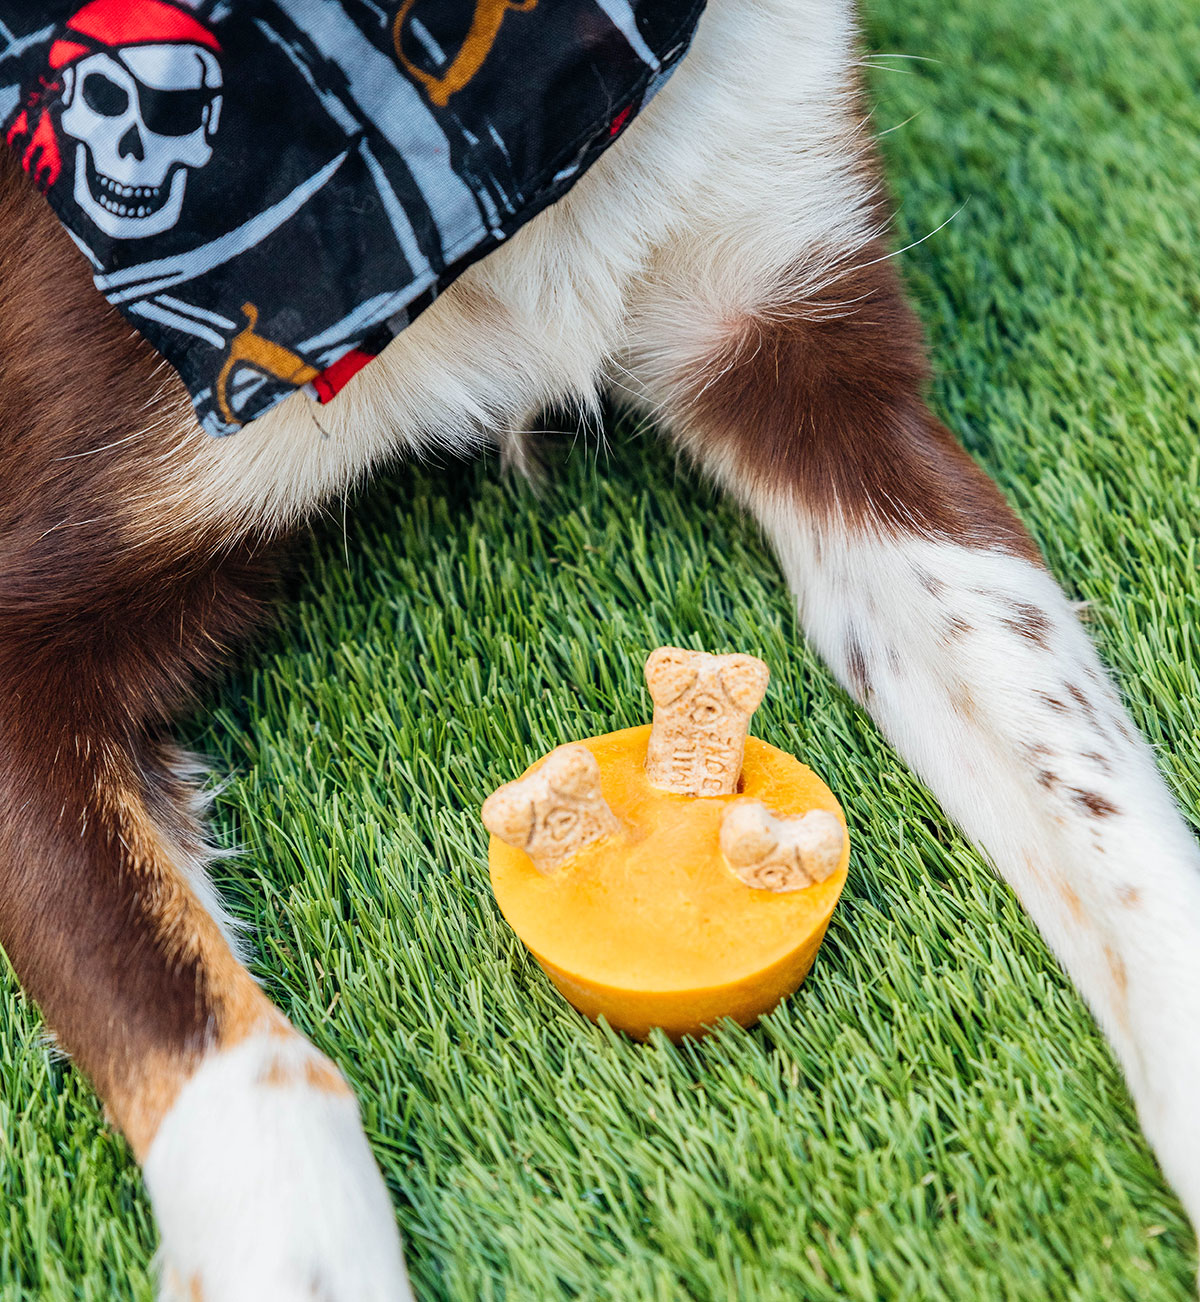 Halloween dog treat cup in between a dog's paws.